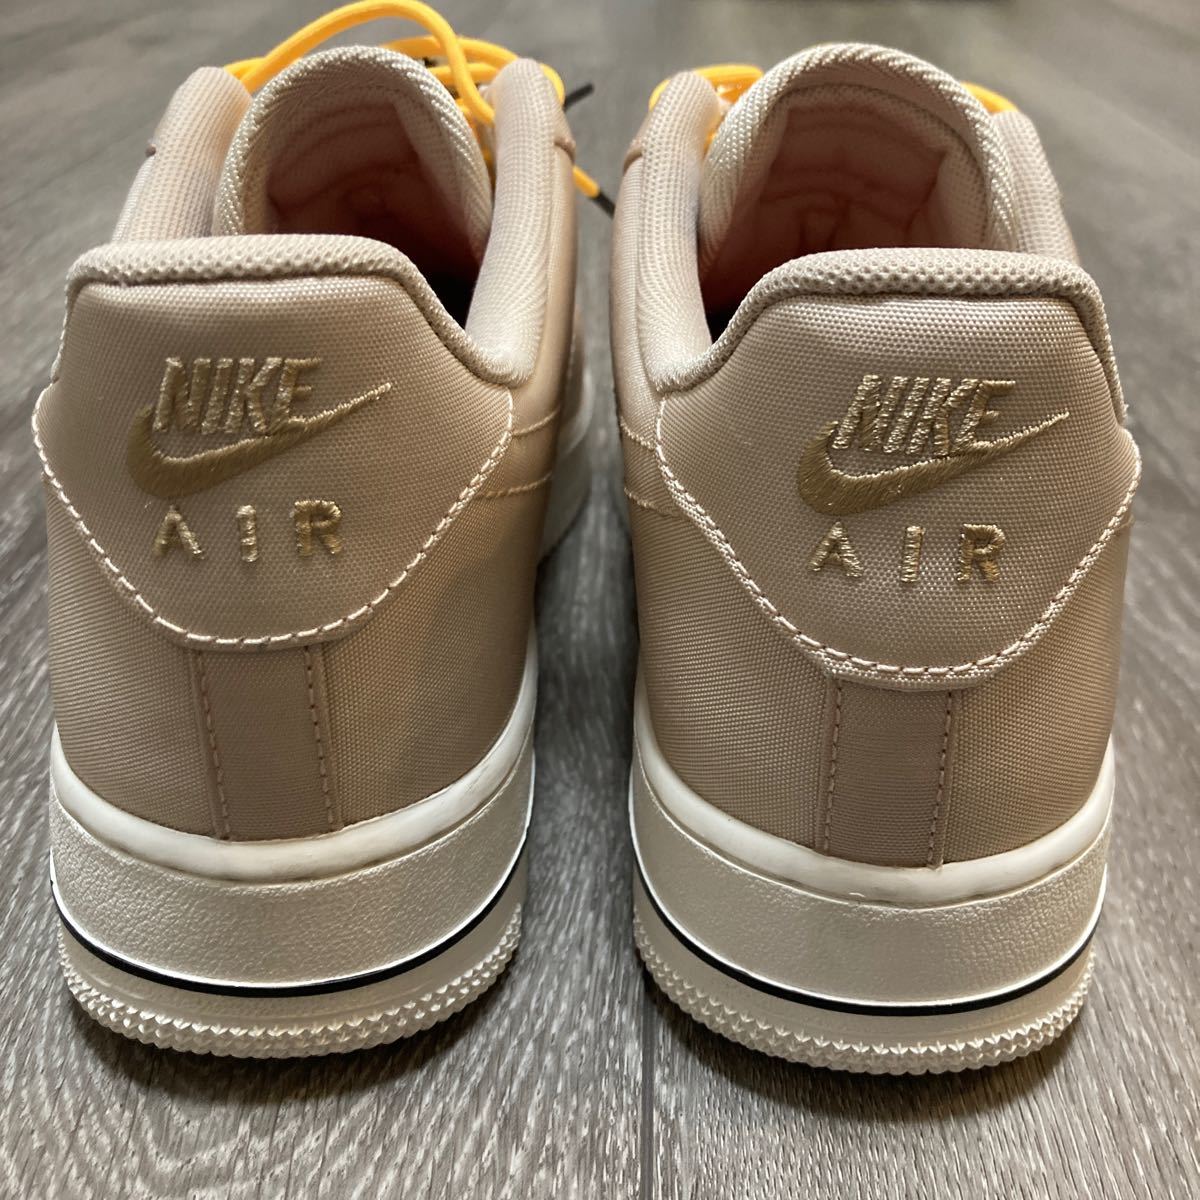 NIKE AIR FORCE 1 '07 LOW LV8 Nike Moving Co. ナイキ エアフォース１ 27cm US9_画像6